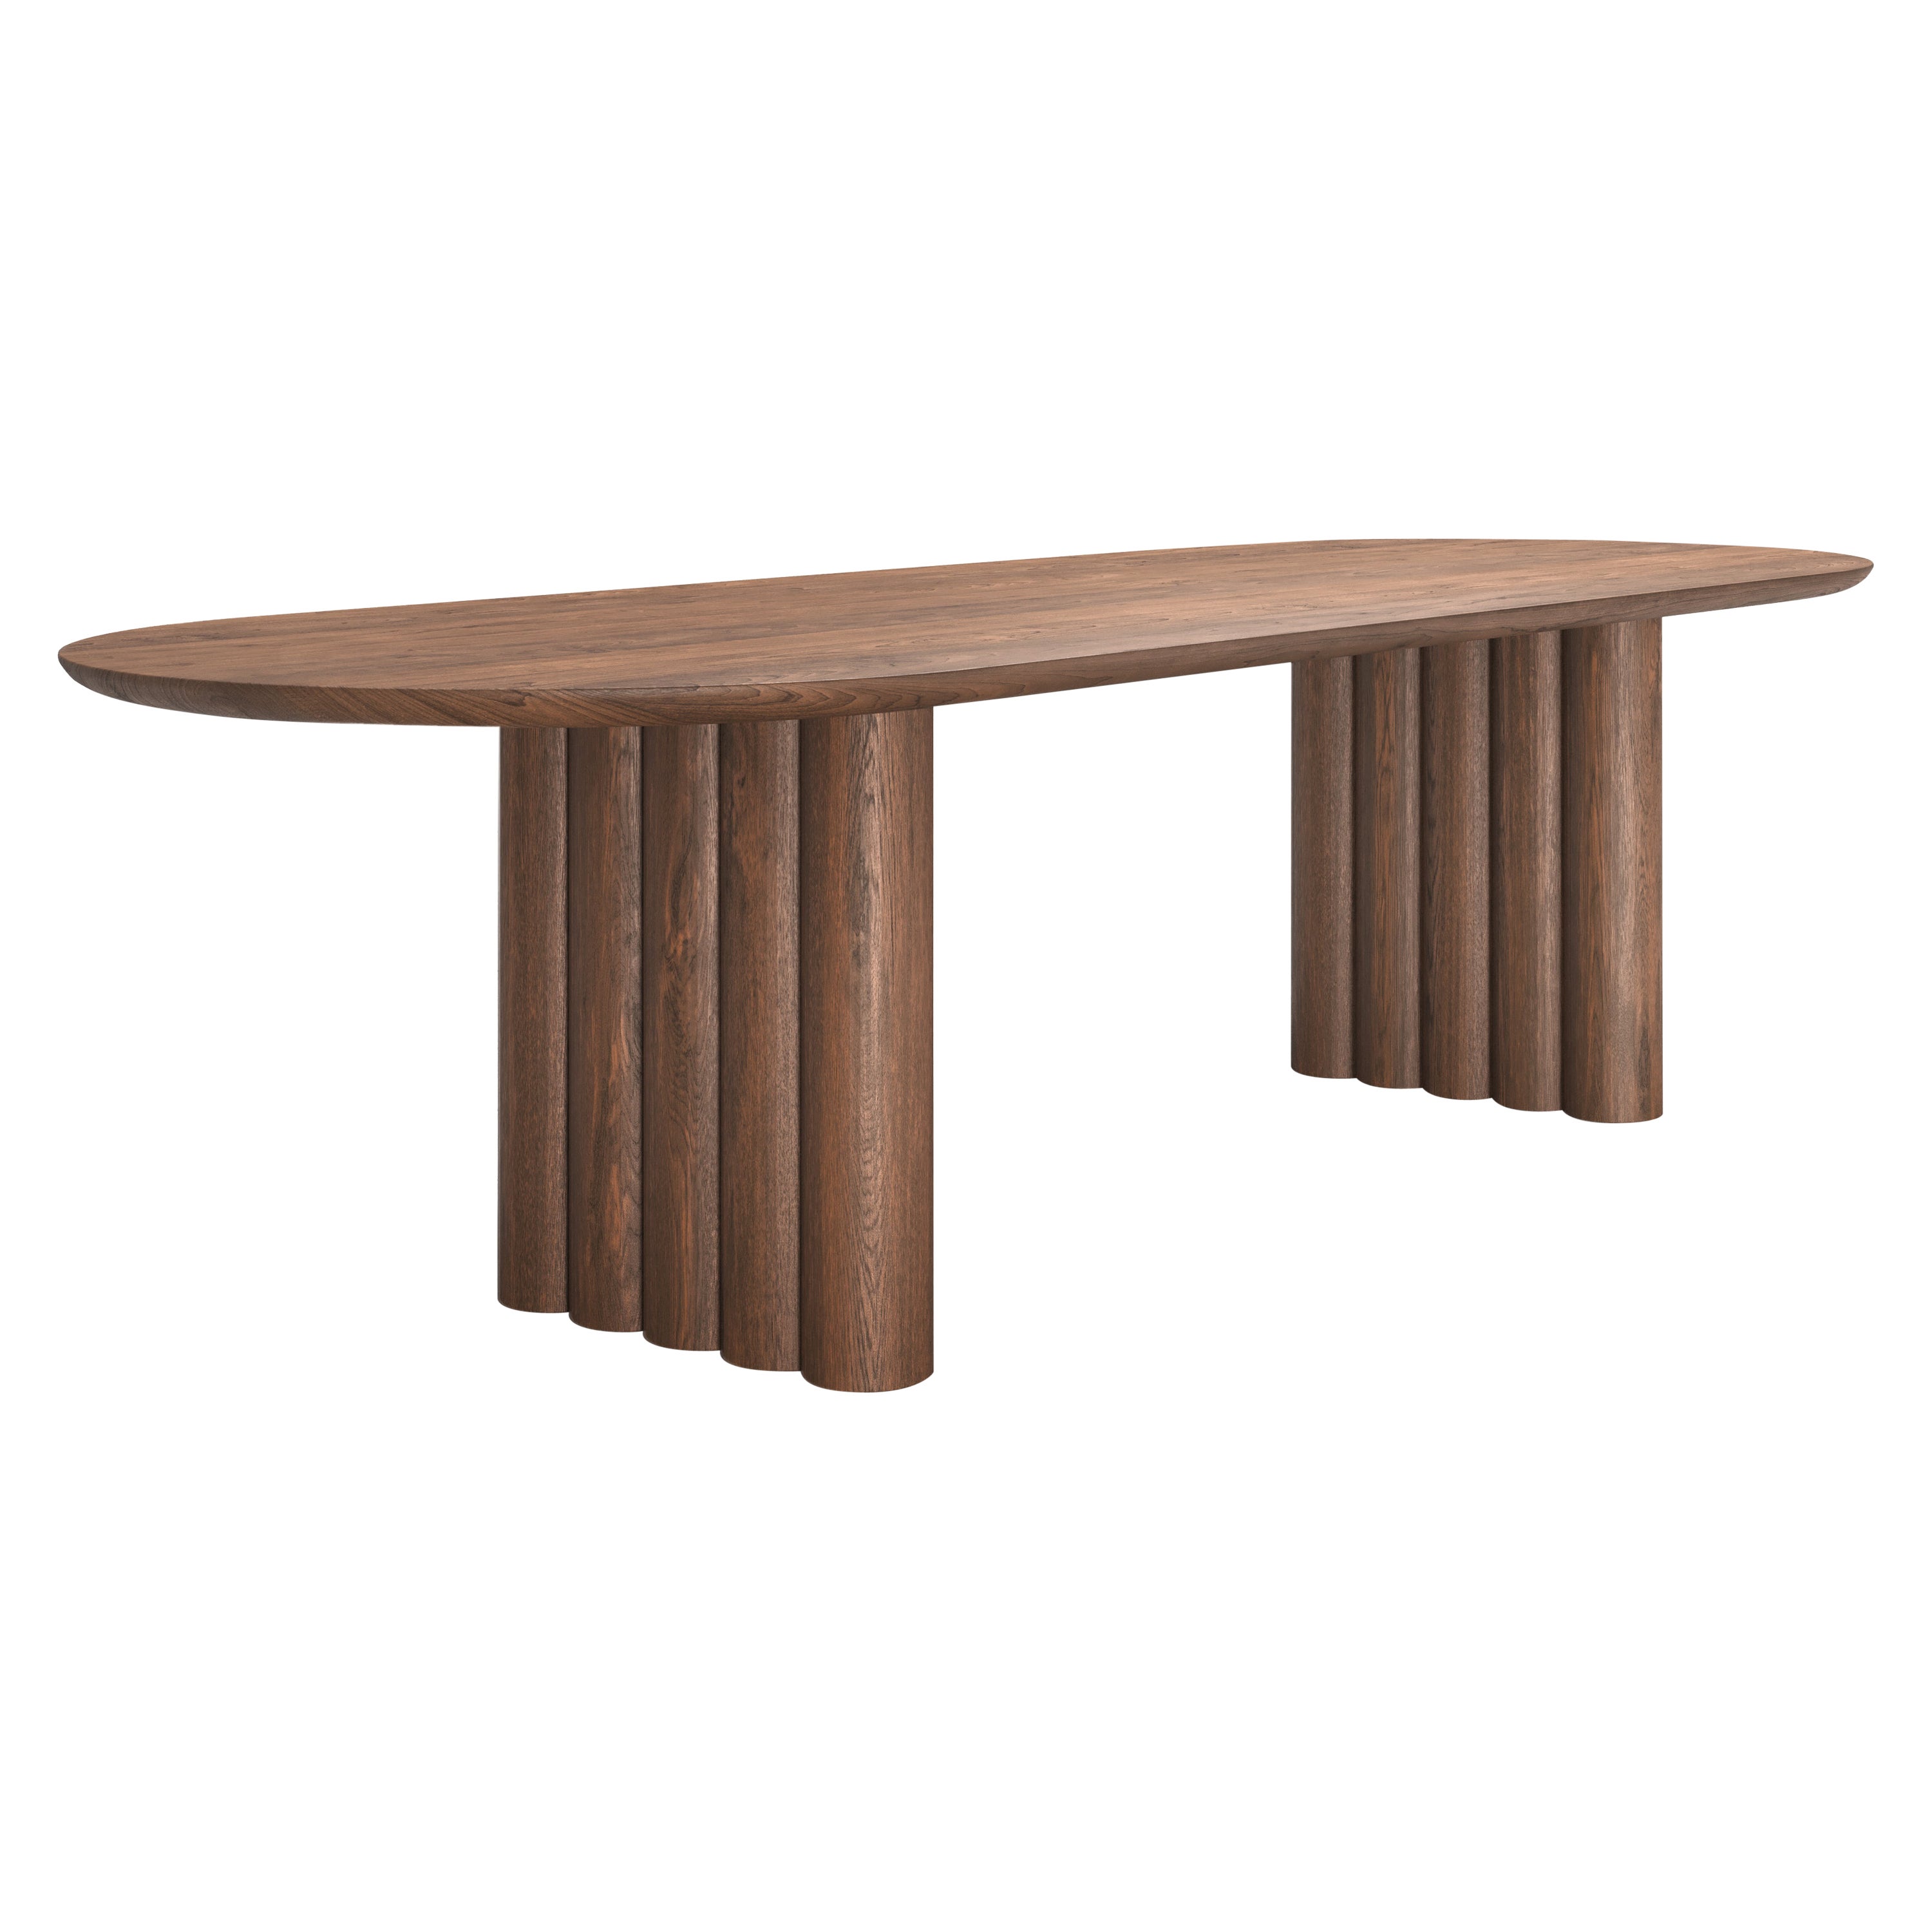 Contemporary Dining Table 'Plush' by Dk3, Smoked Oak or Walnut, 300